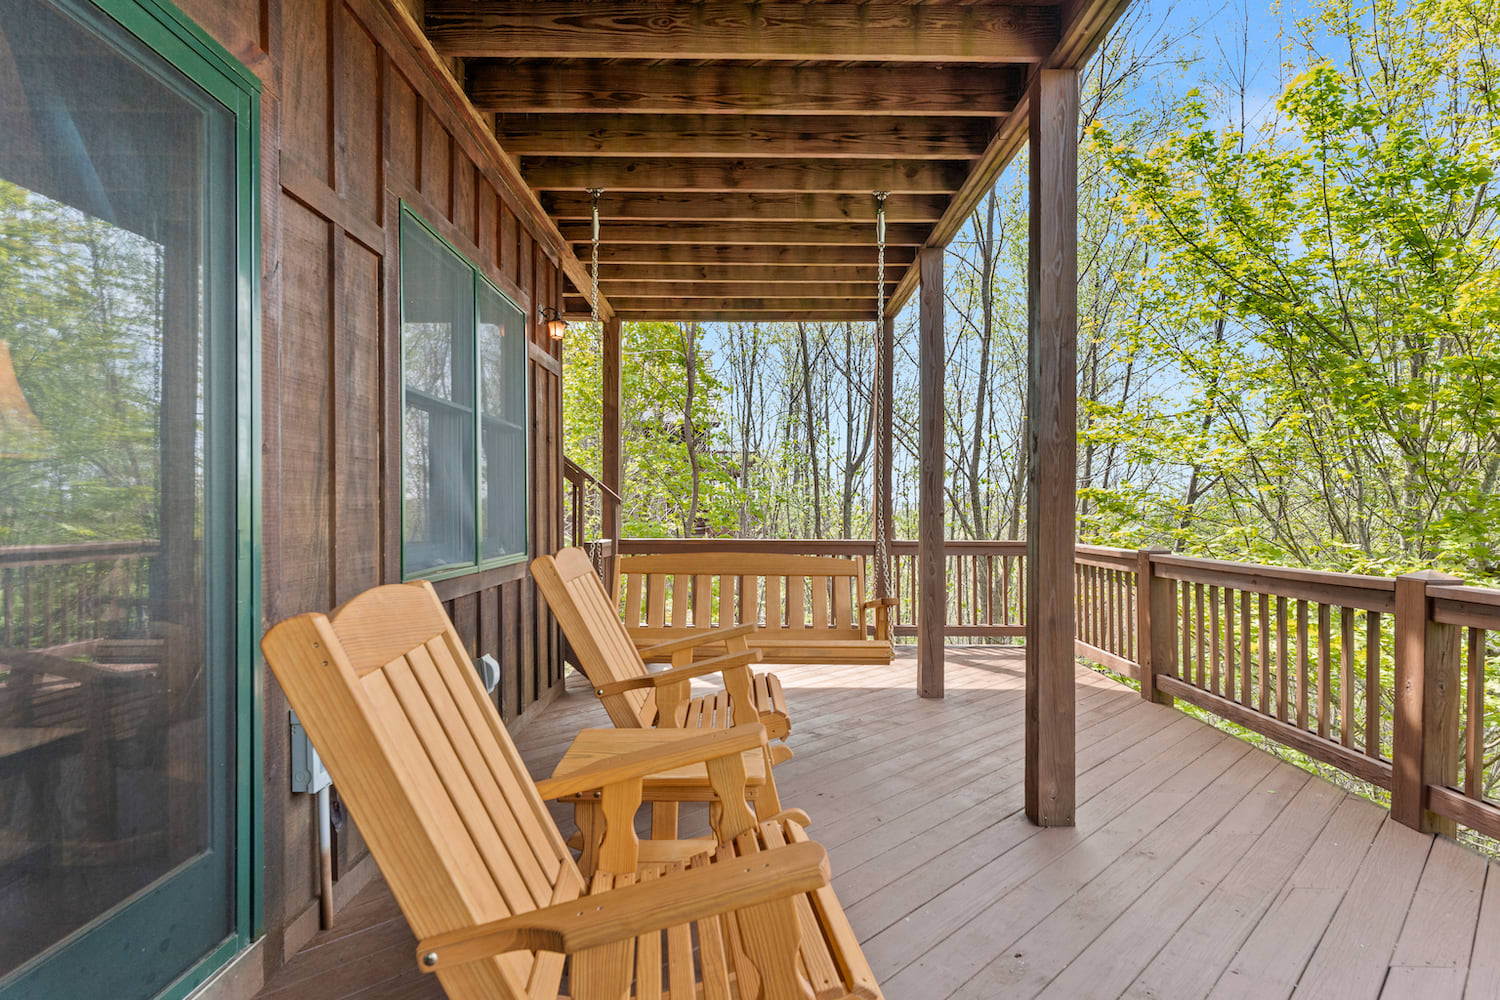 Cozy porch swing, chairs and a brand new hot tub